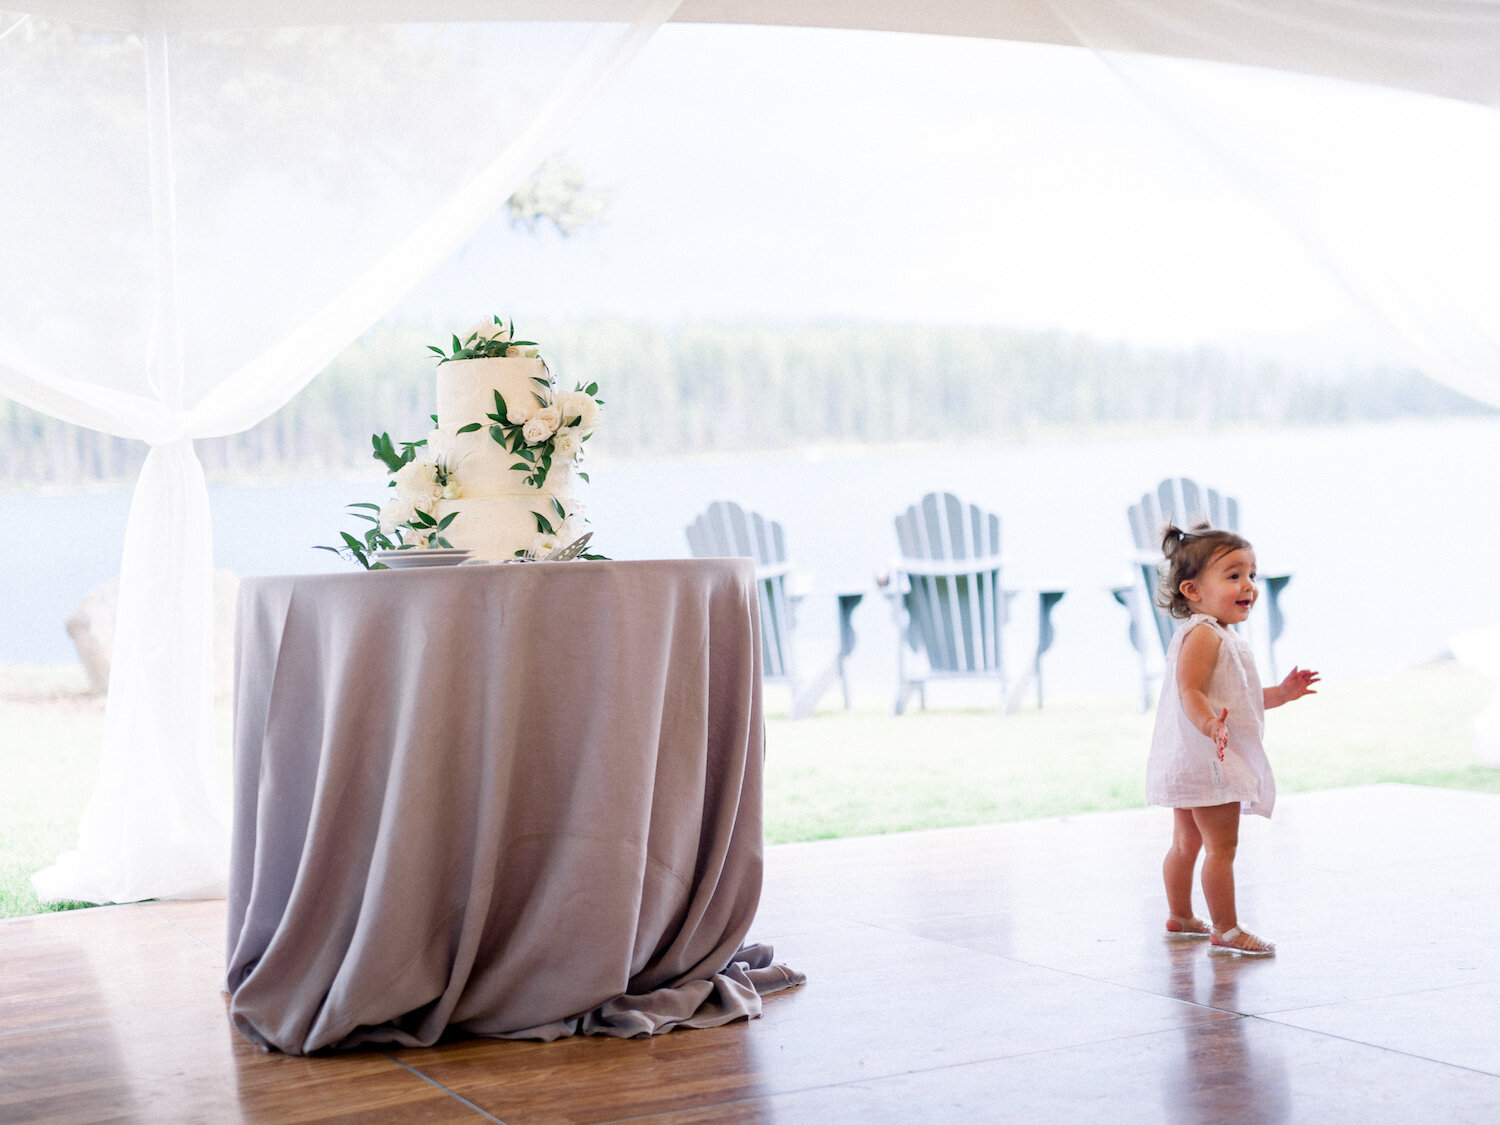 Small Wedding Package in Montana